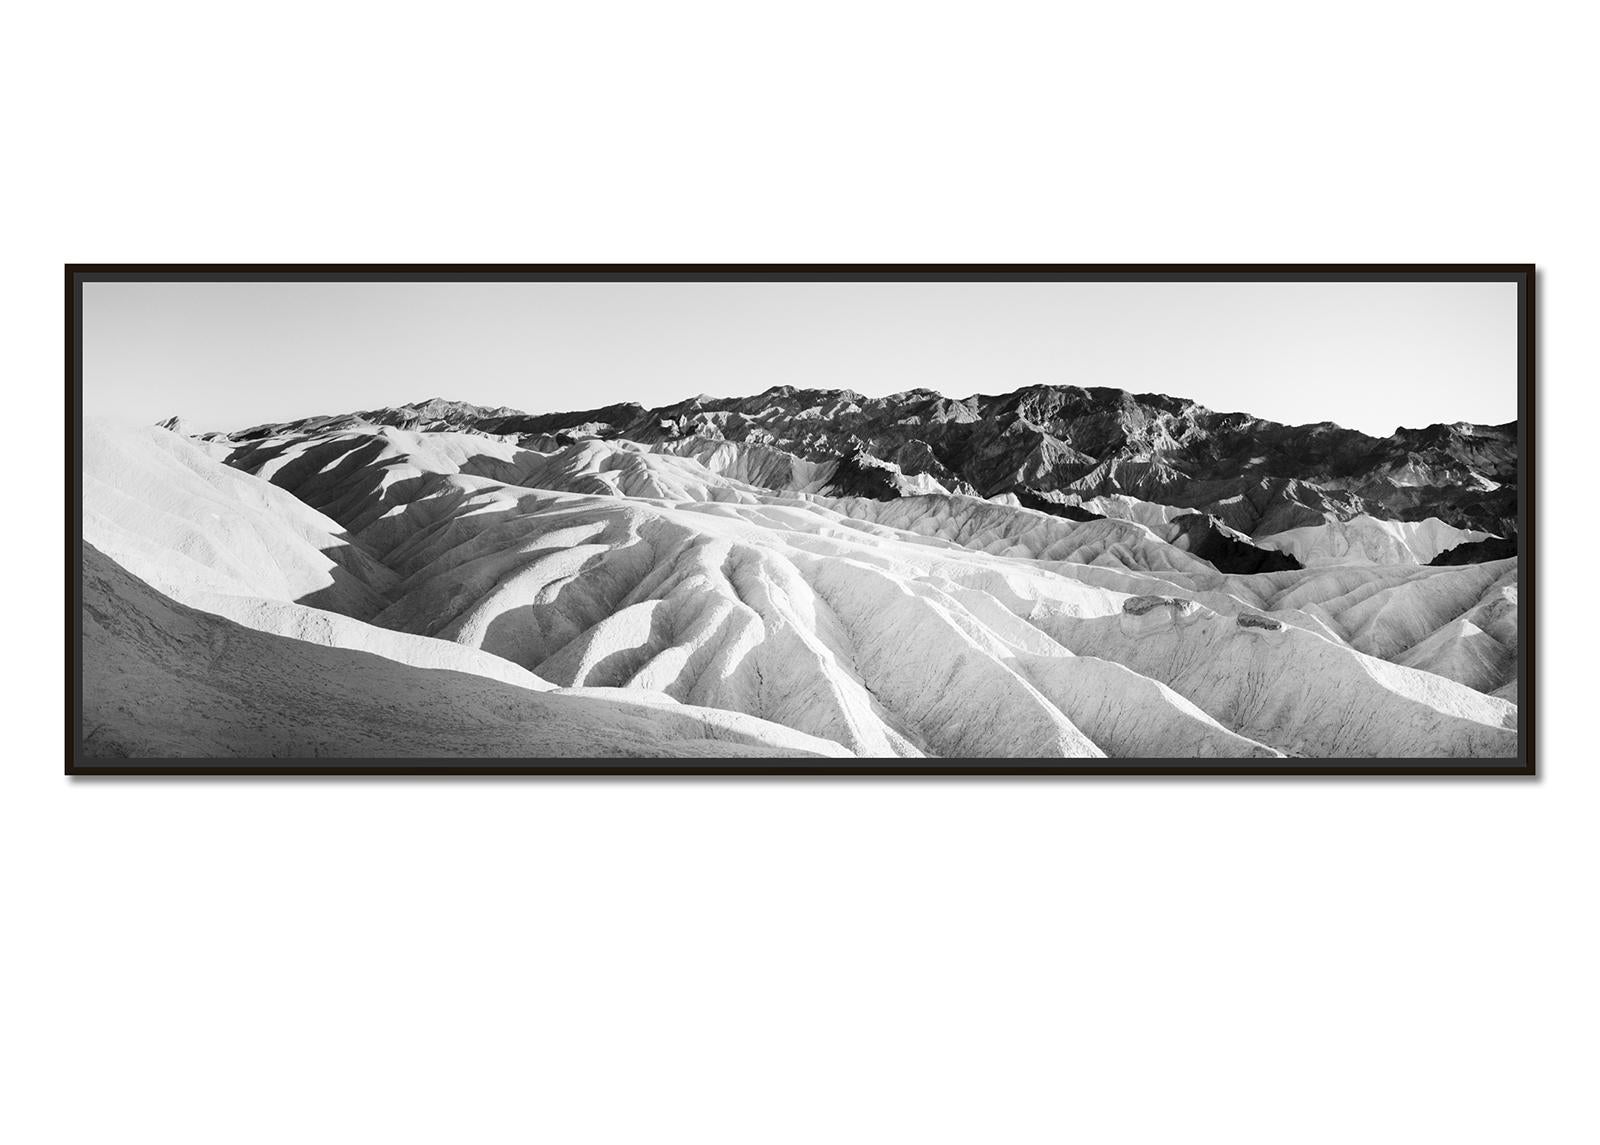 Shadow Mountains, Death Valley, USA, black and white photography, landscape - Photograph by Gerald Berghammer